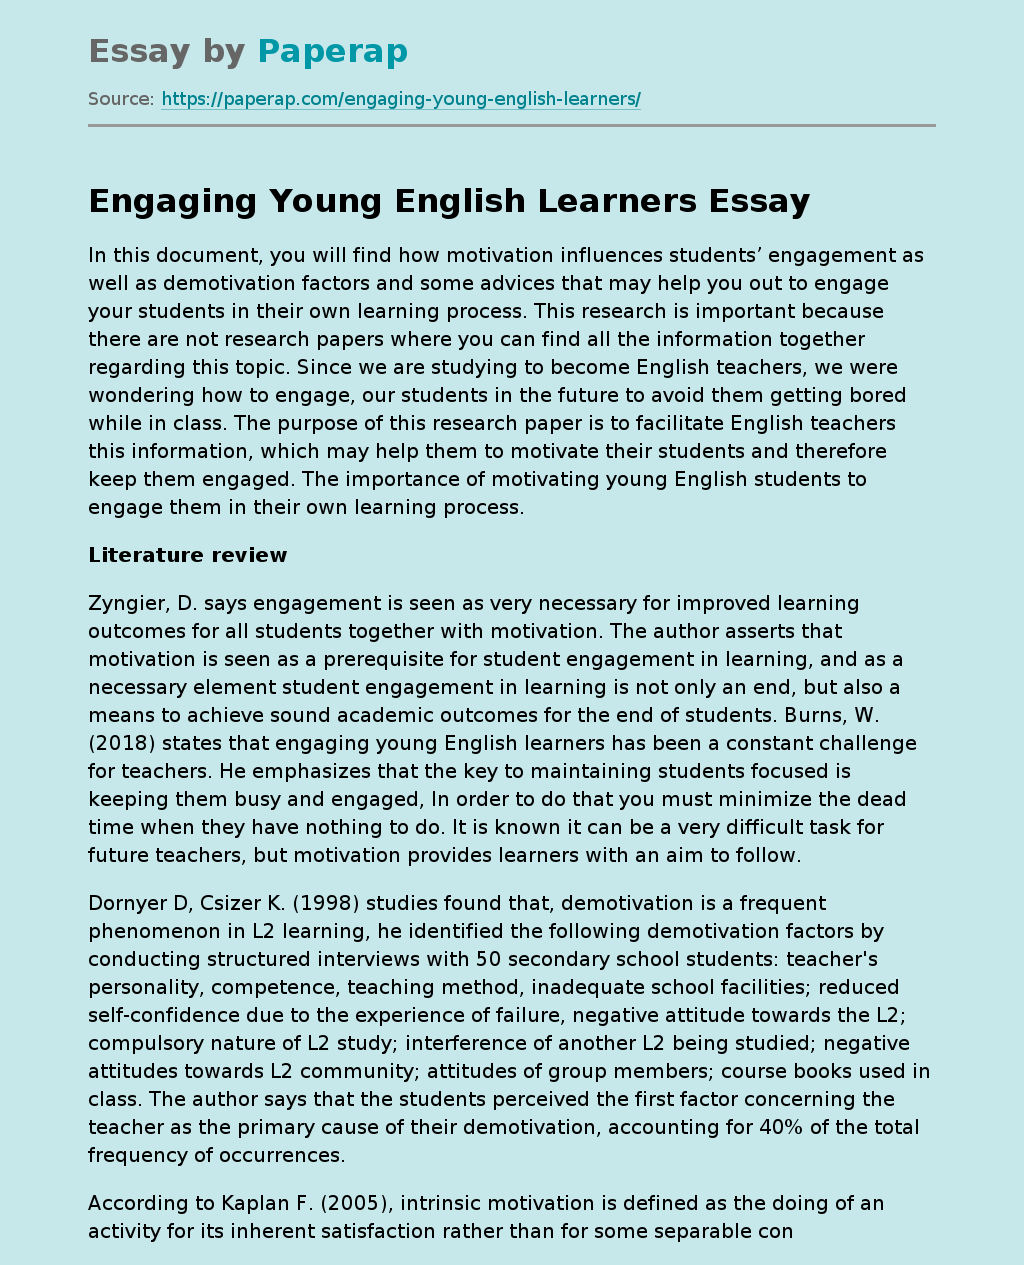 Engaging Young English Learners